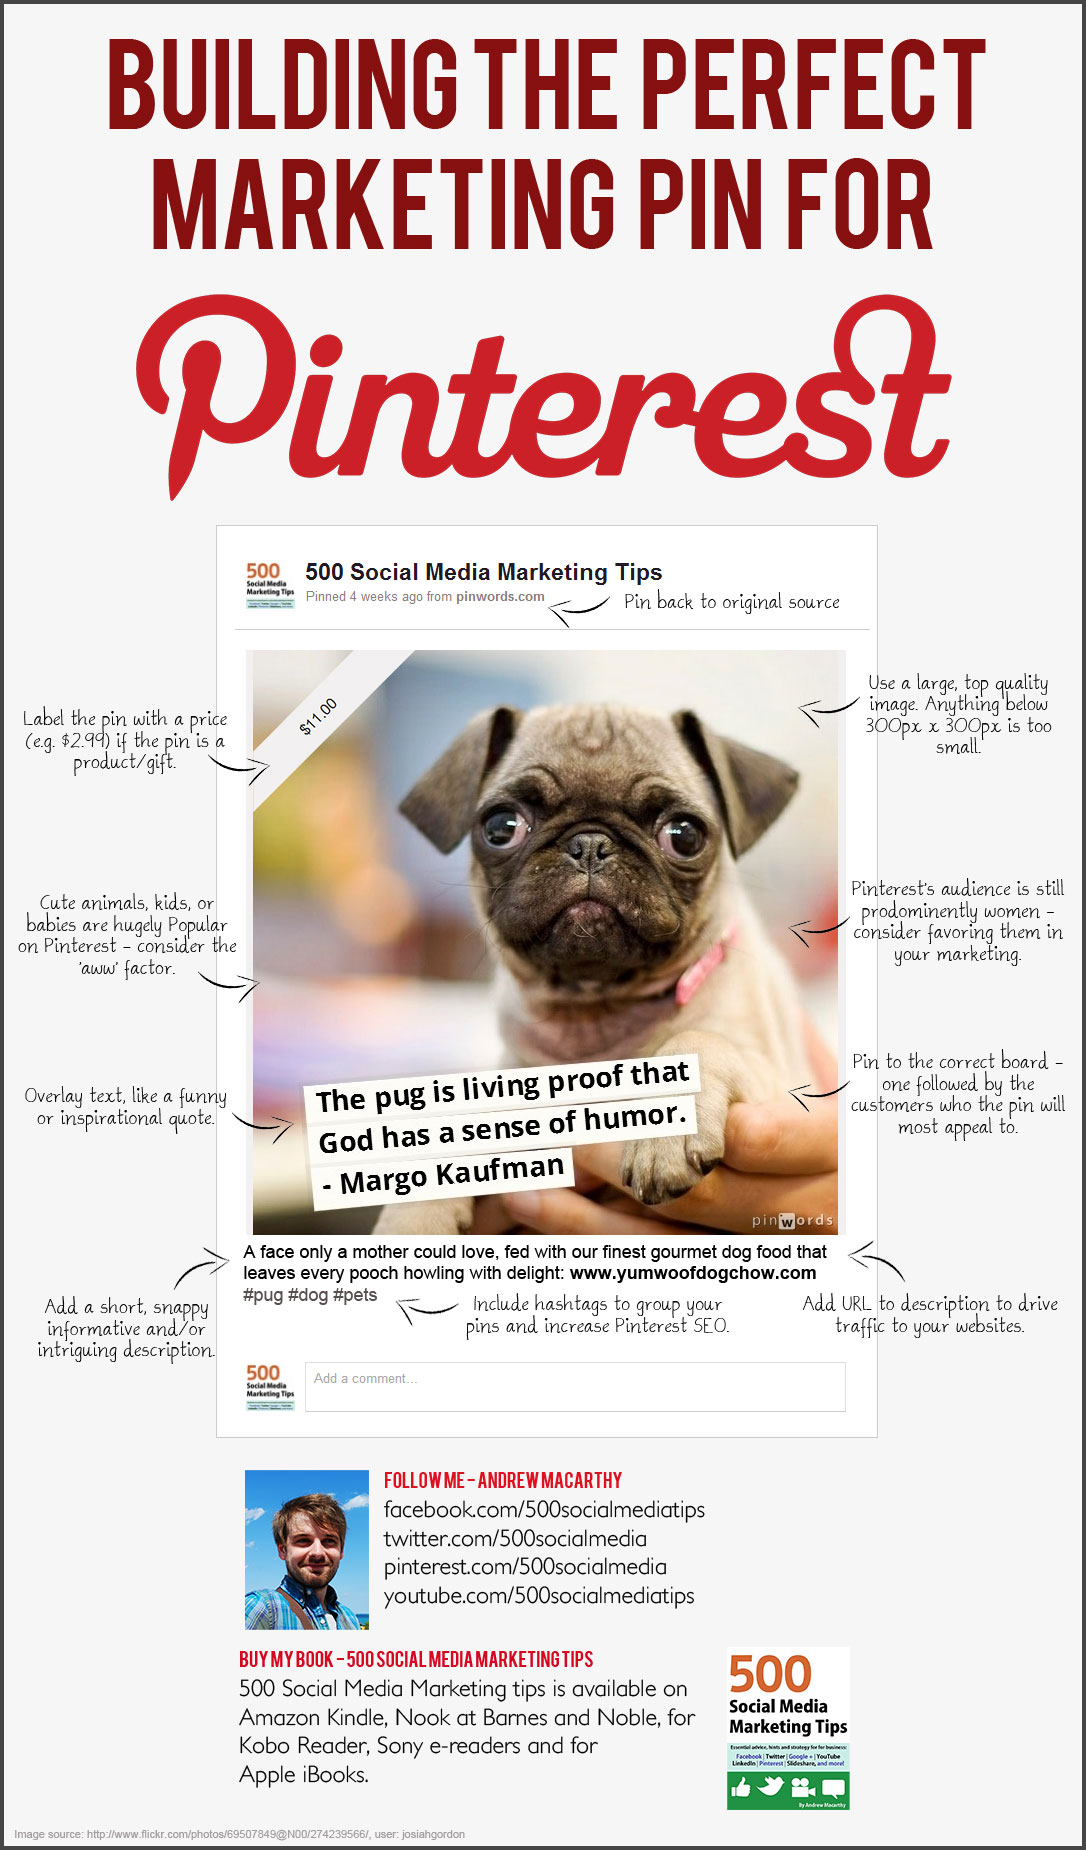 Building the Perfect Markeitng Pin for Pinterest – Tips on Creating an Effective Pin